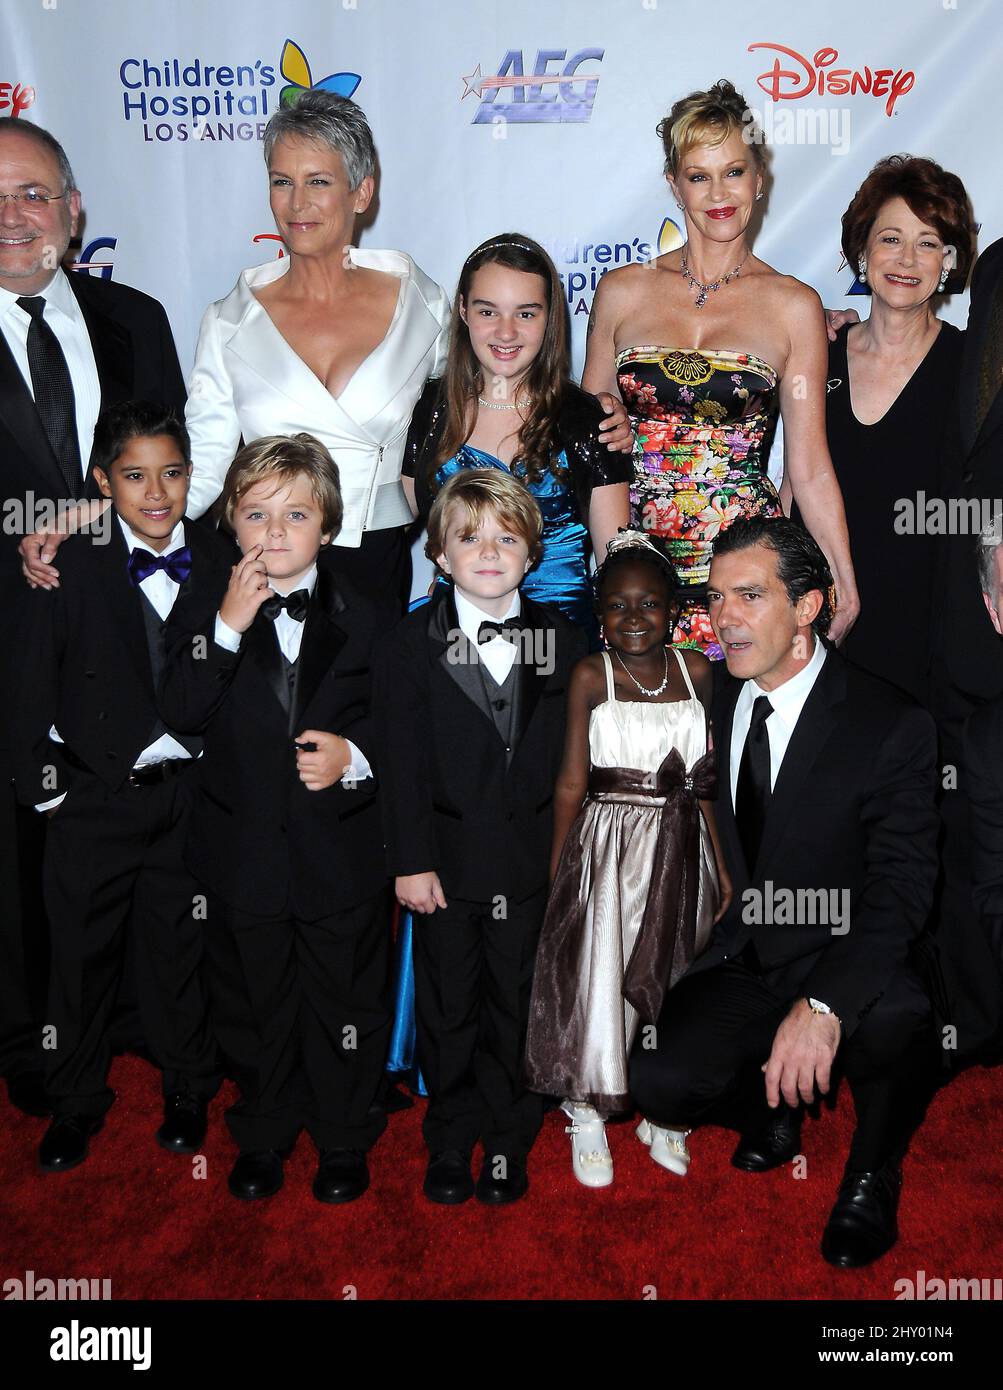 Jamie Lee Curtis, Melanie Griffith and Antonio Banderas during the Children's Hospital Los Angeles Gala 'Noche De Ninos' Held at L.A. Live Event Deck, Los Angeles Stock Photo